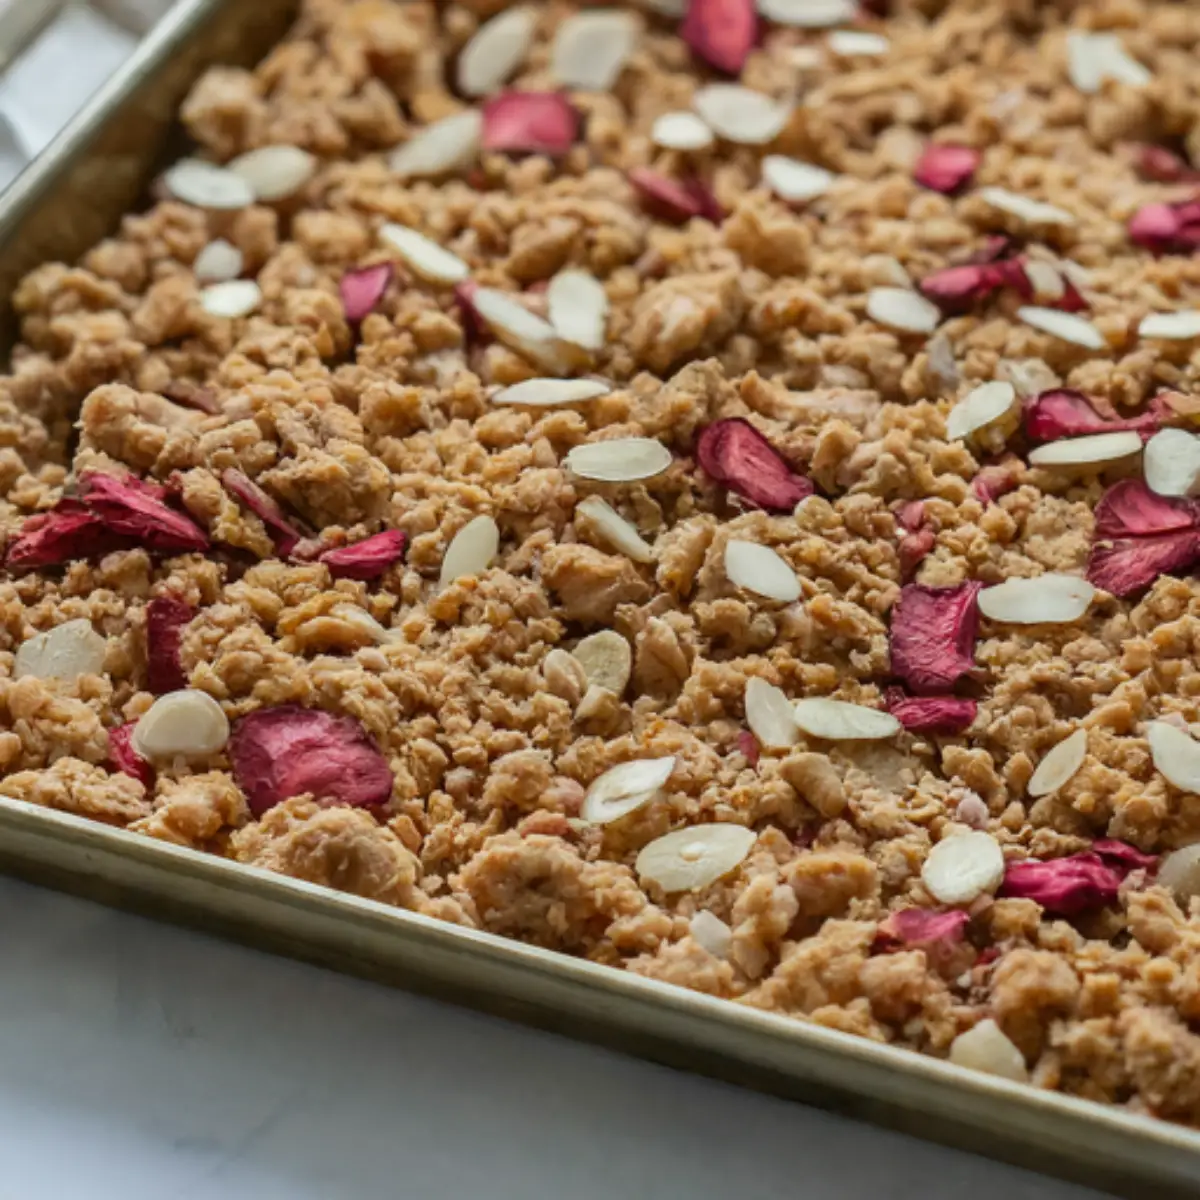 shot of a baking sheet filled with homemade strawberry crunch. The crumbly mixture is golden brown and studded with chopped dried strawberries and sliced almonds.